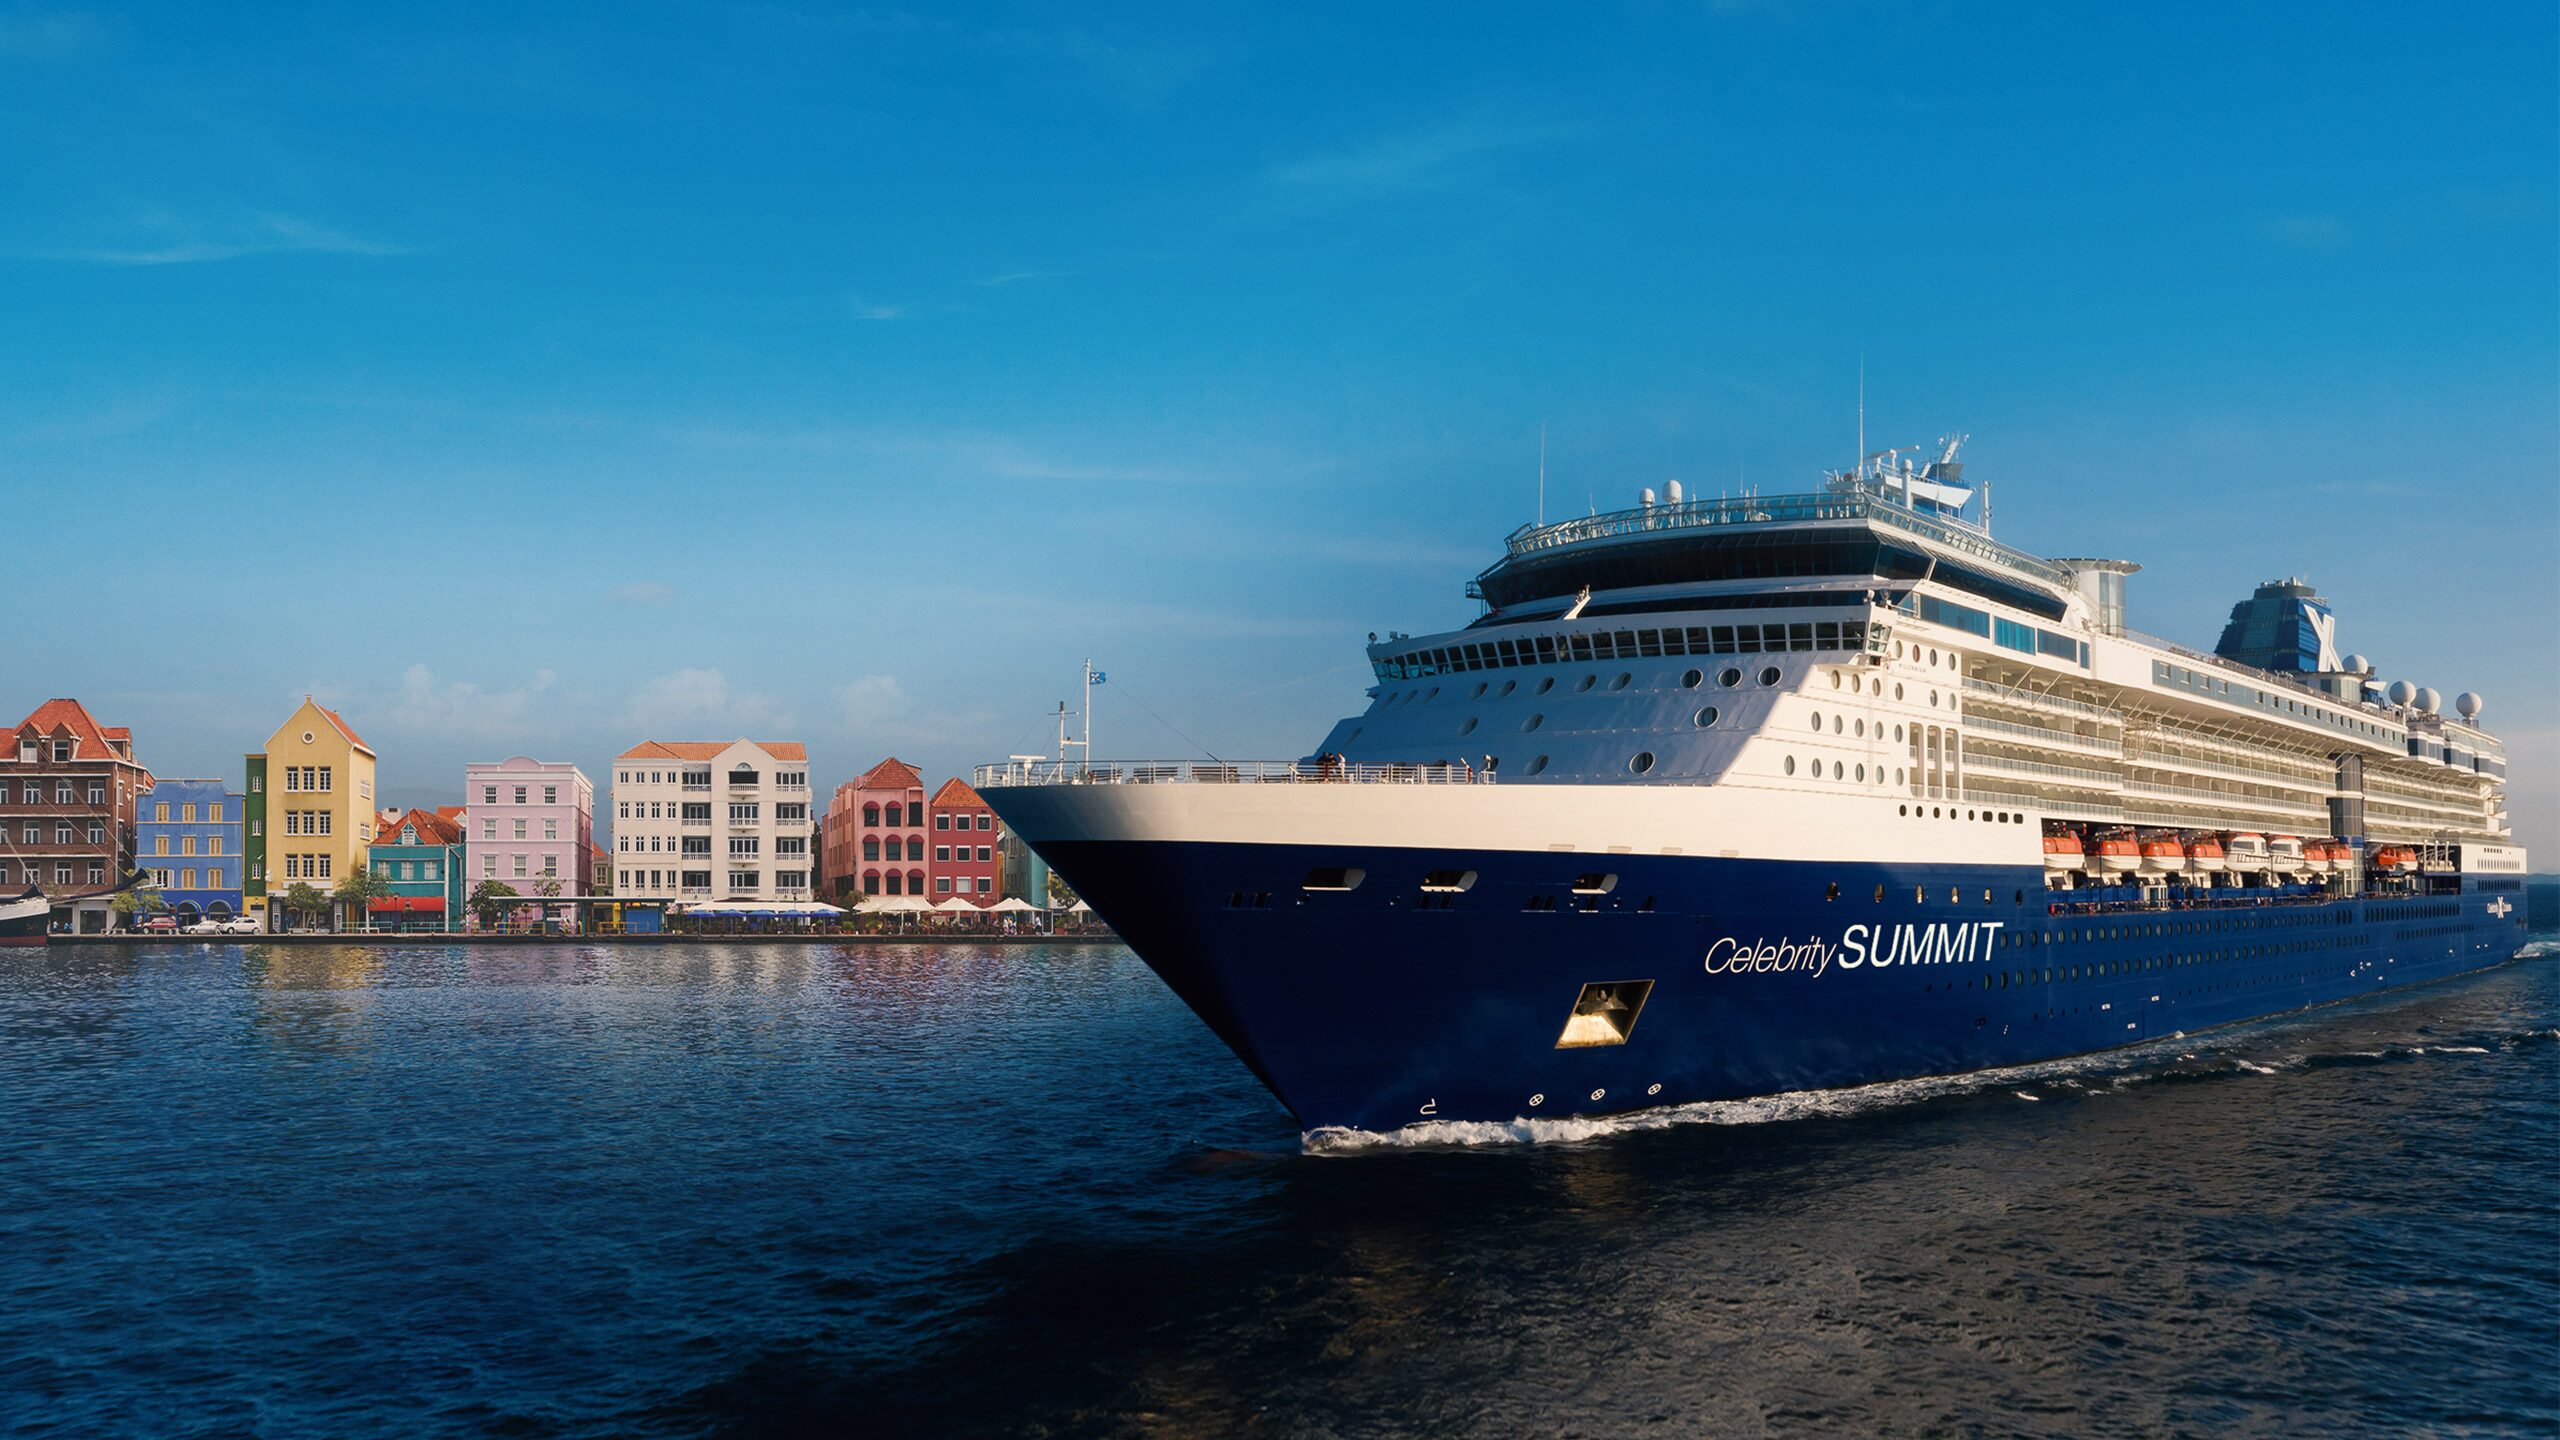 where is celebrity summit cruise ship